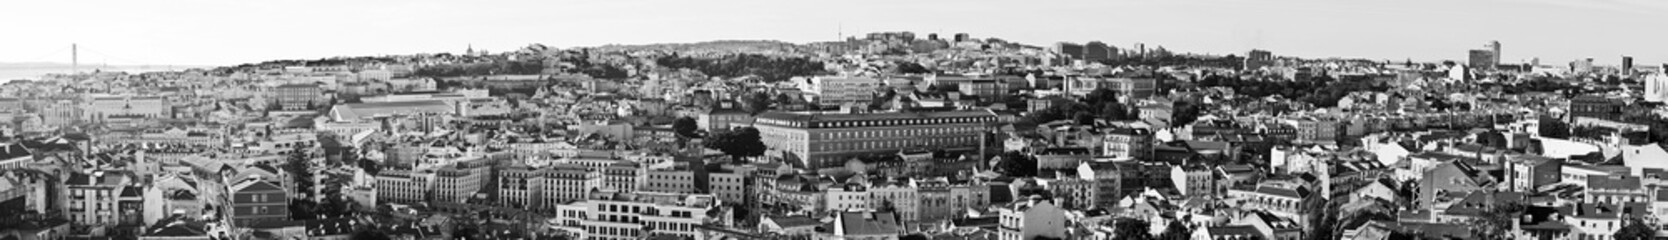 Lisbon, Portugal panoramic image, in black and white